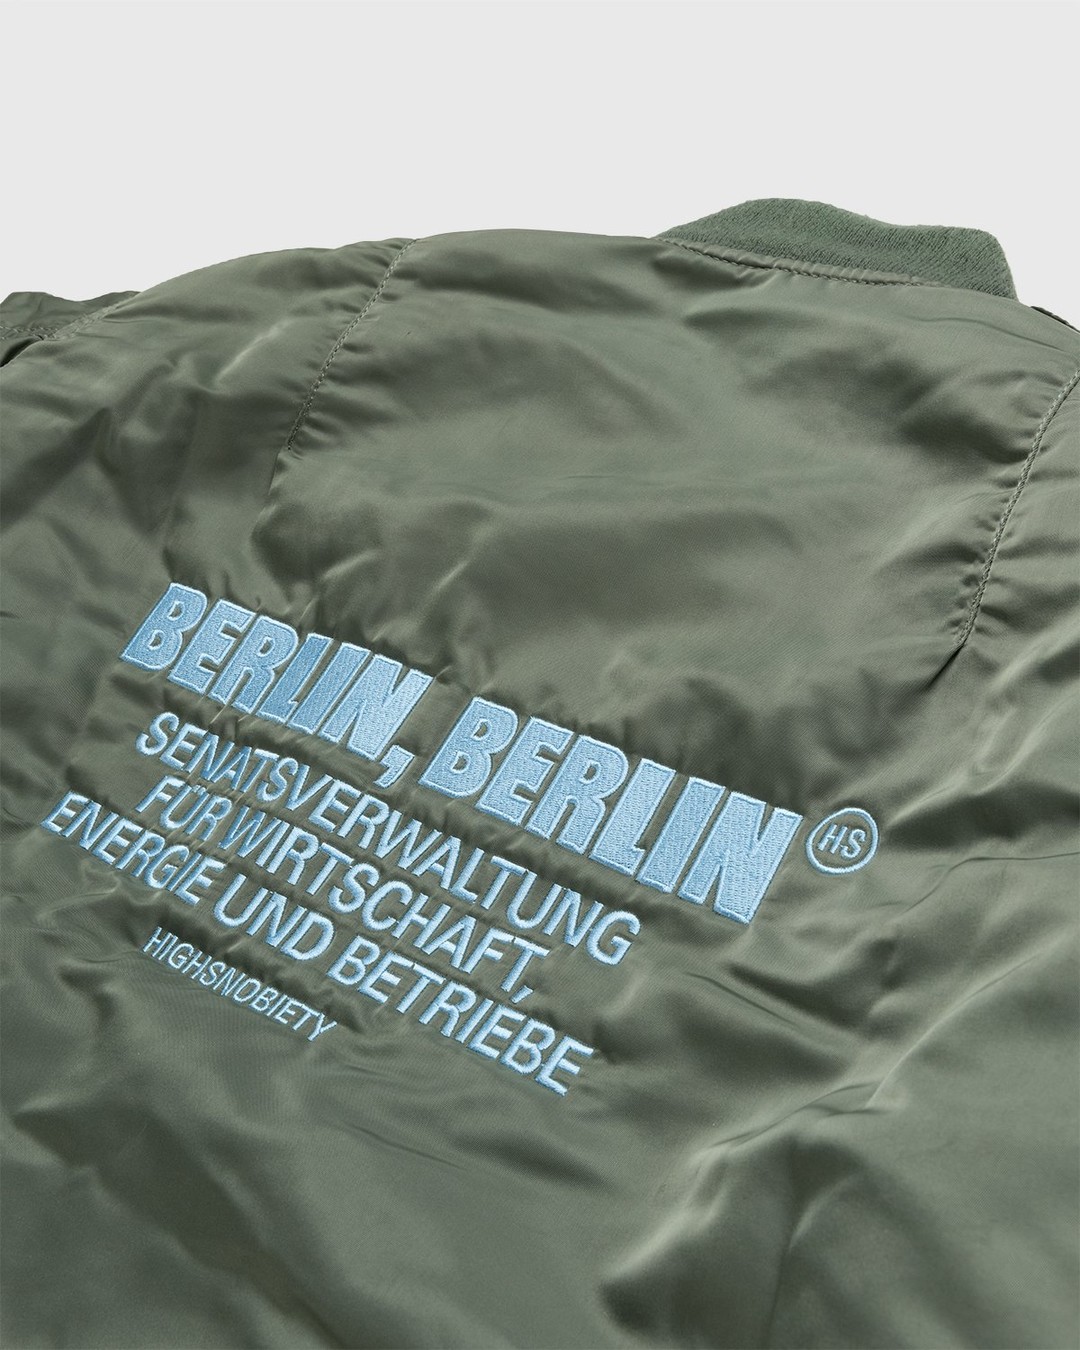 Highsnobiety – Berlin Berlin Embroidered Vintage MA-1 Green - Bomber Jackets - Green - Image 3